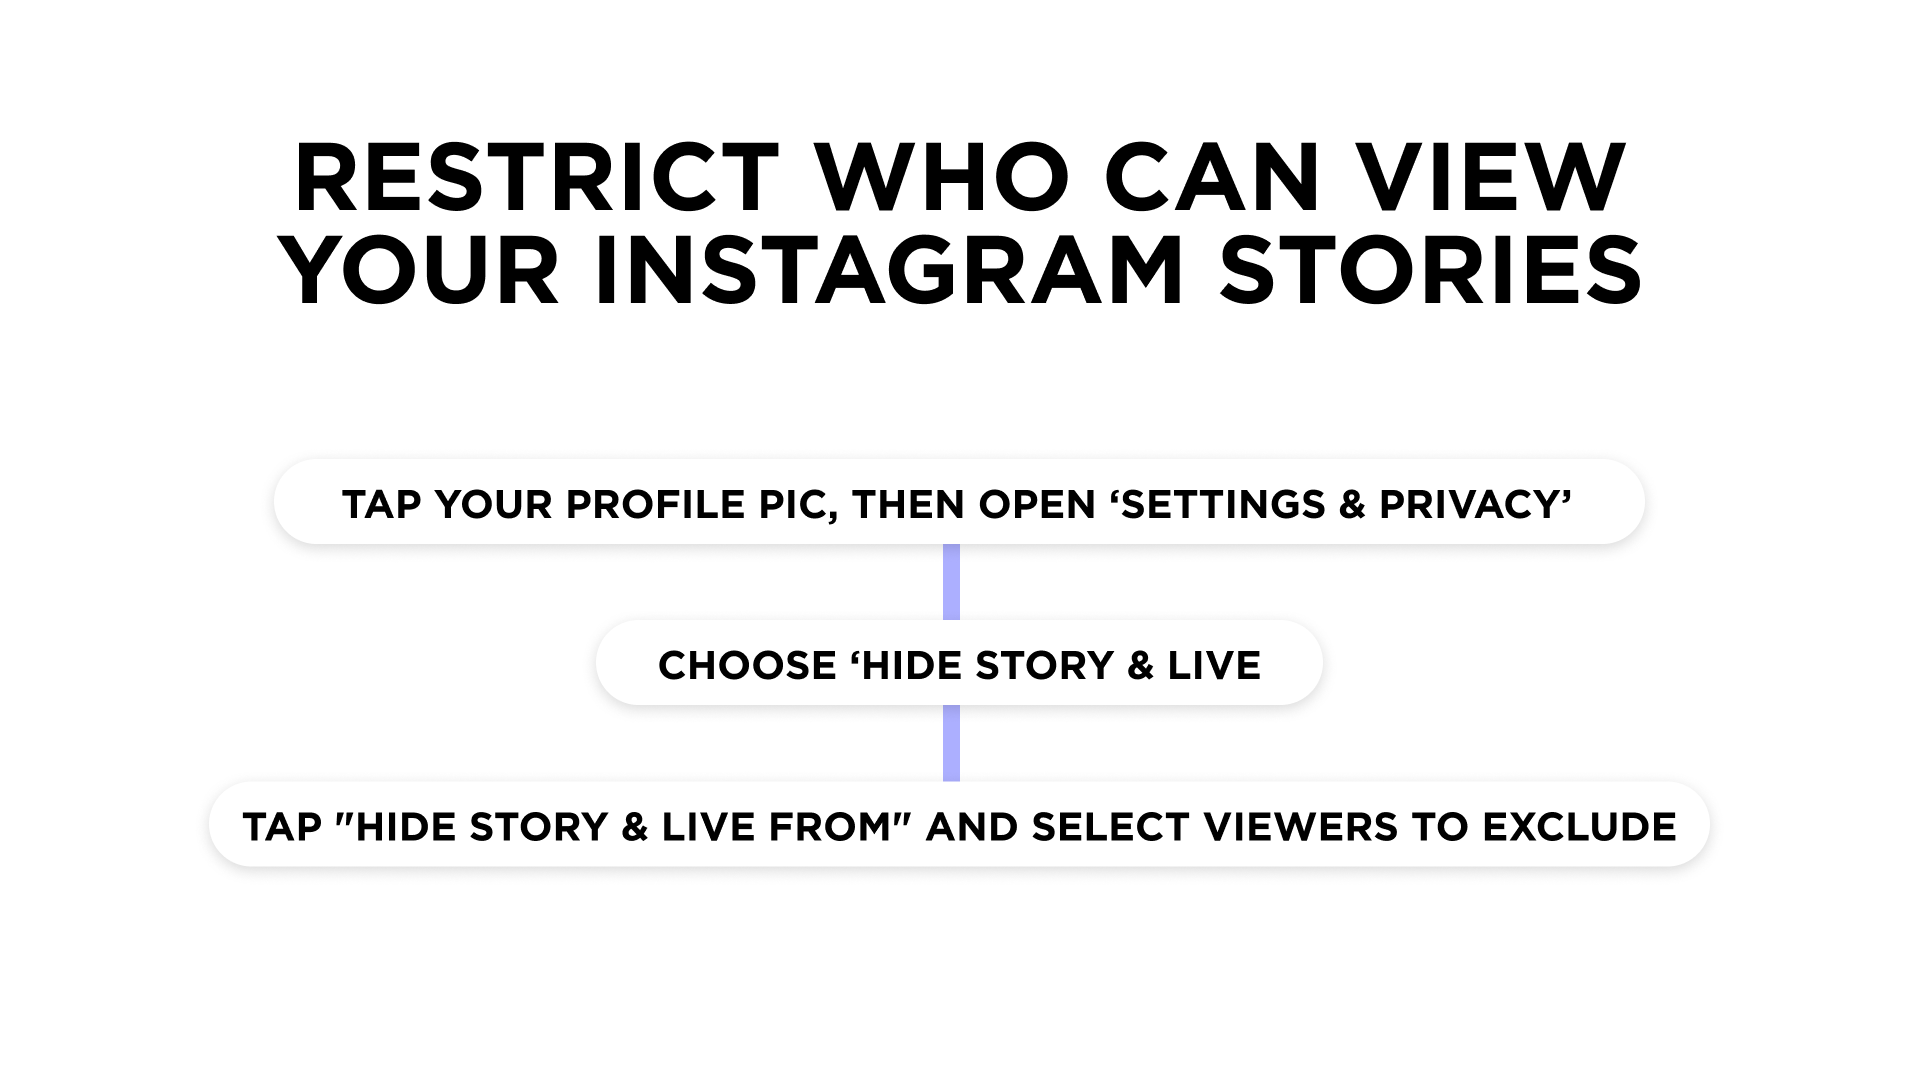 How to restrict who can view your Instagram Stories